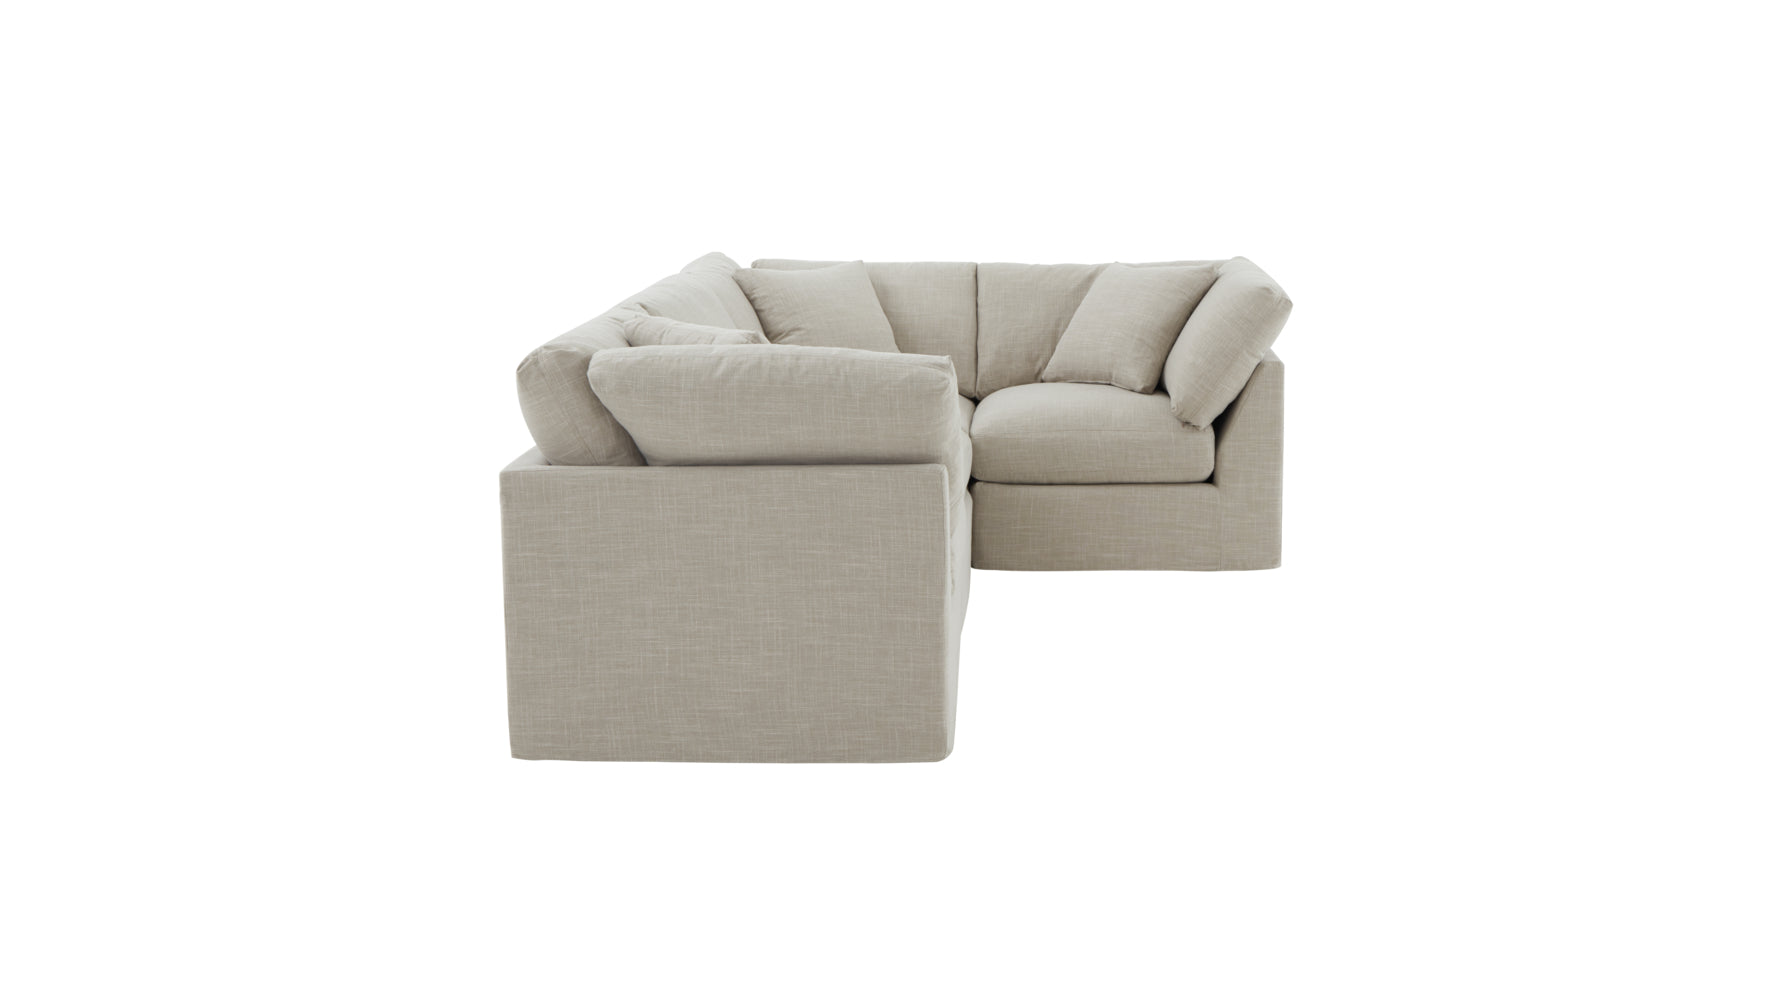 Get Together™ 4-Piece Modular Sectional Closed, Standard, Light Pebble - Image 5